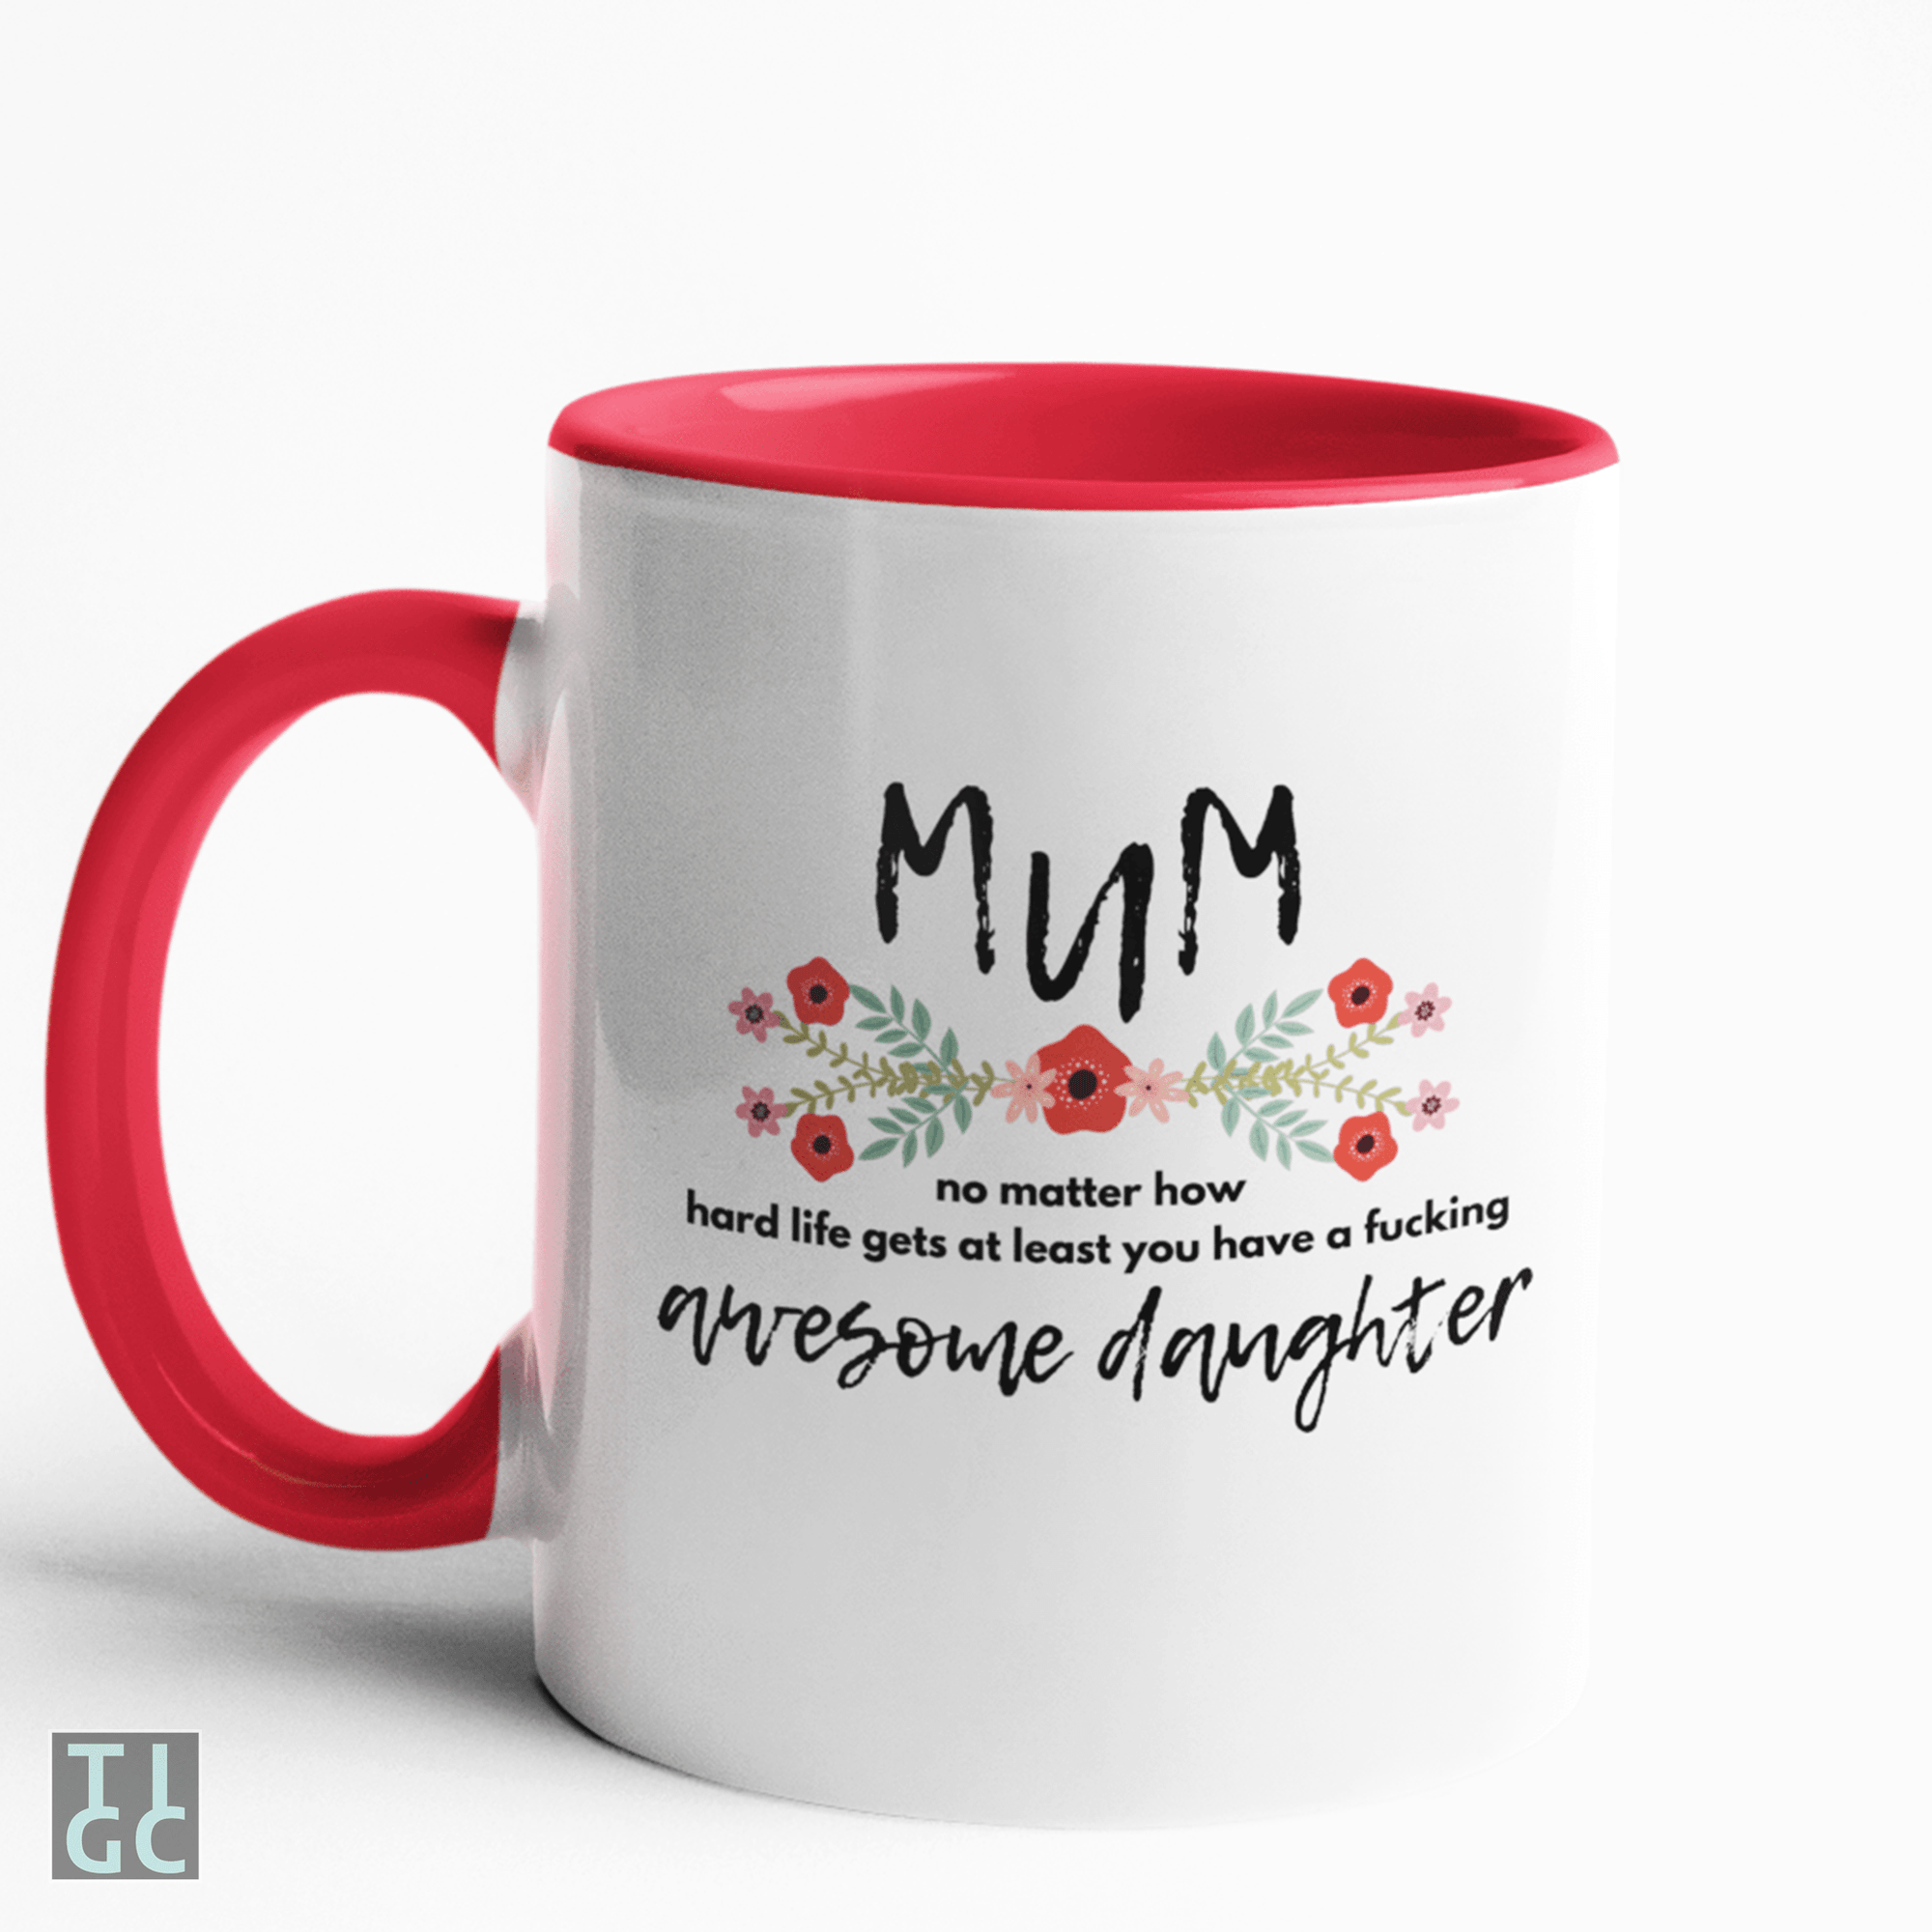 TIGC The Inappropriate Gift Co Mum - Awesome Daughter Mug